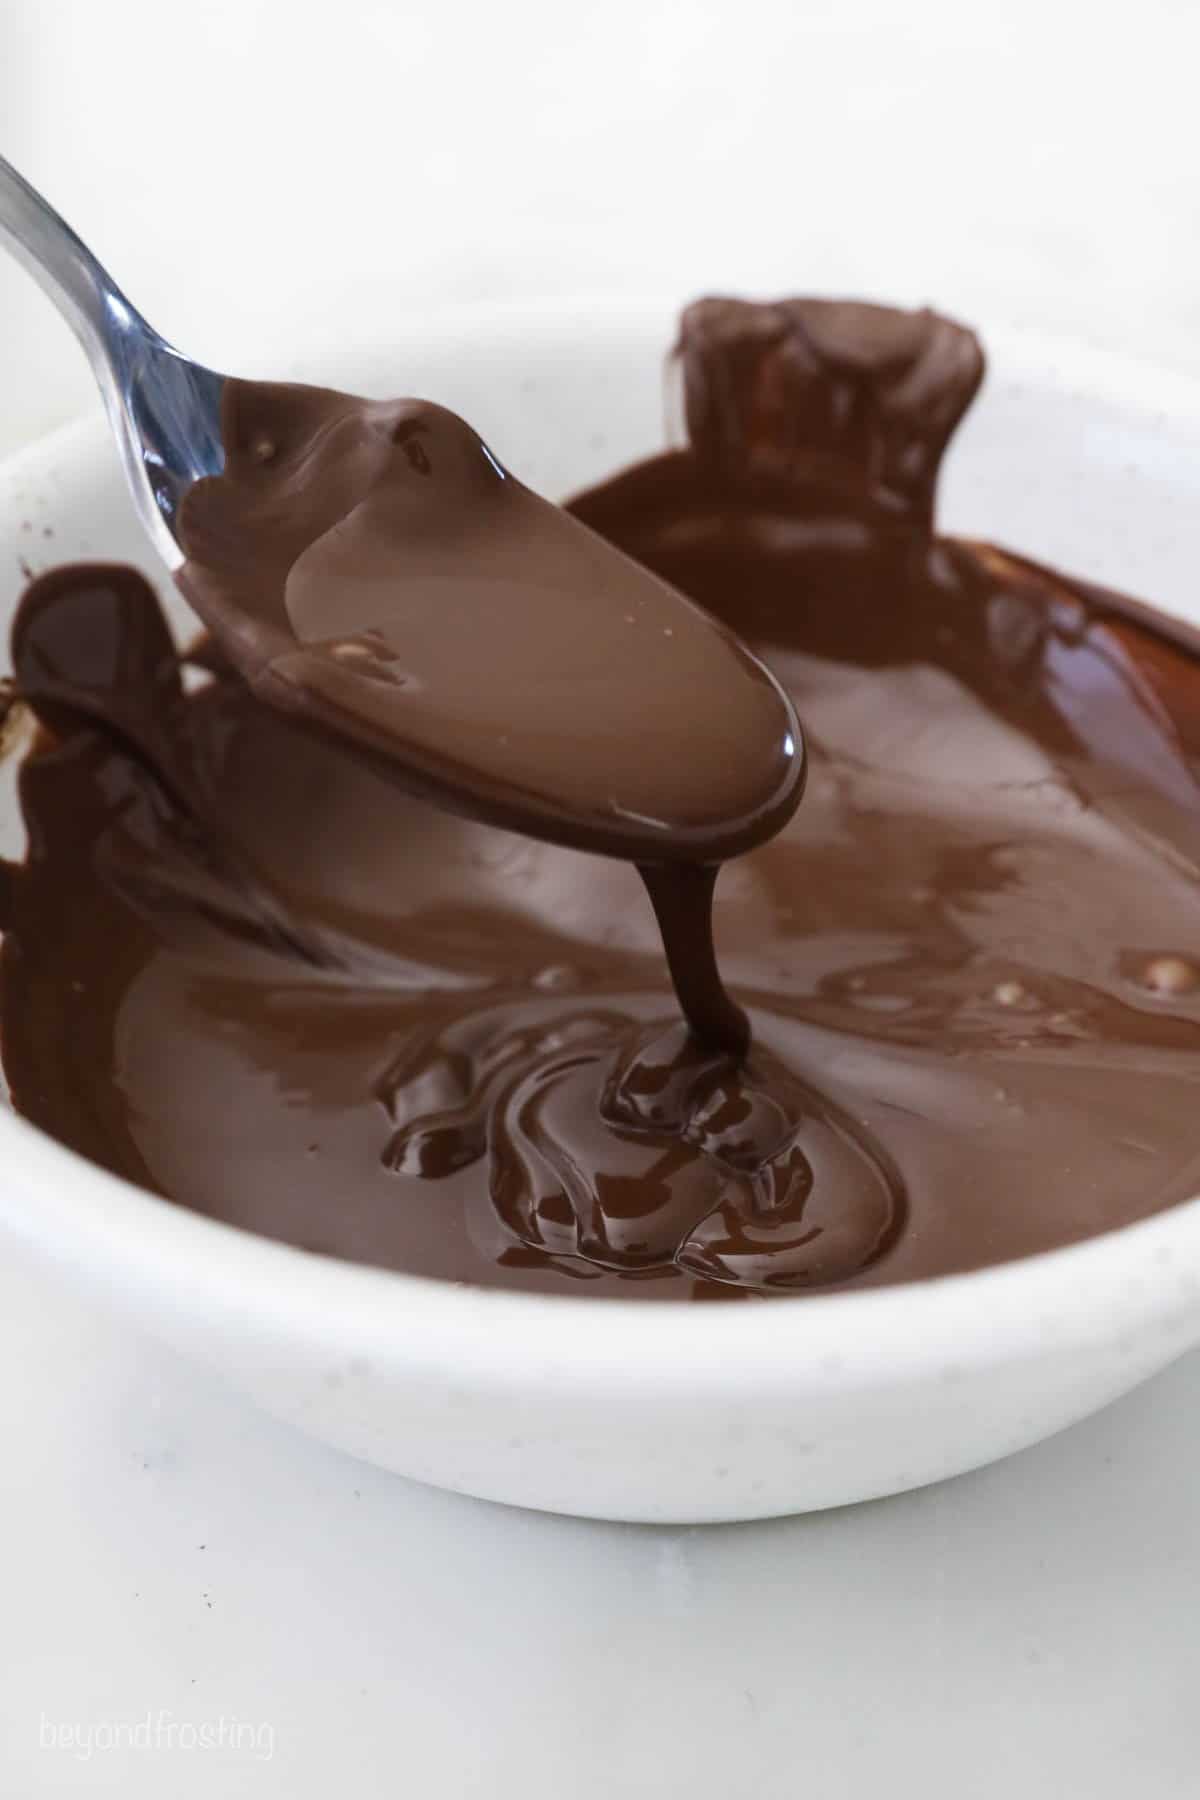 Melted chocolate in a white bowl with a metal spoon scooping some out